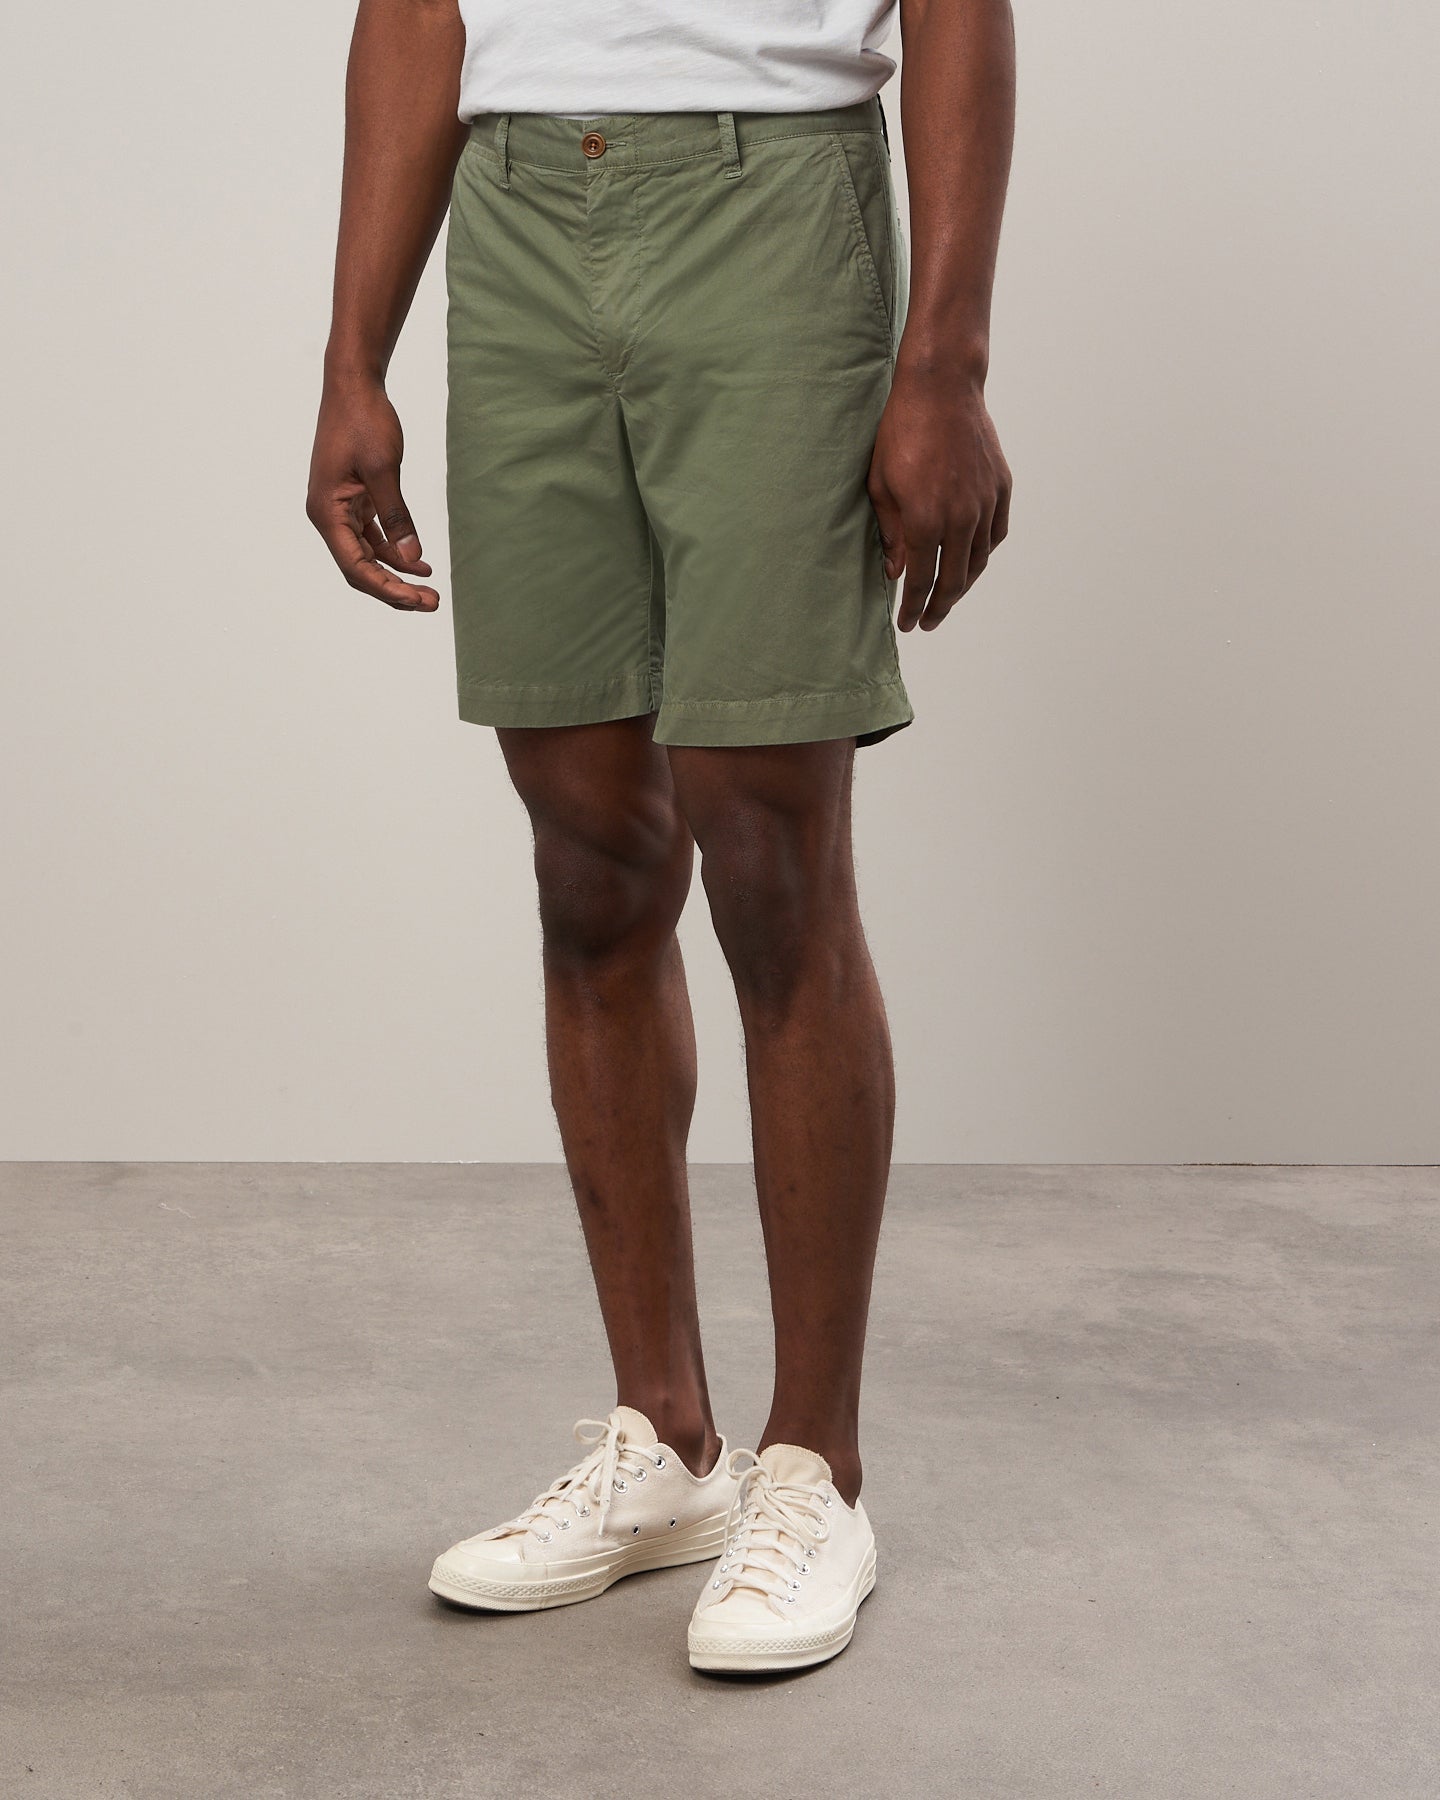 Short Homme chino Vert militaire Byron BB58102-106